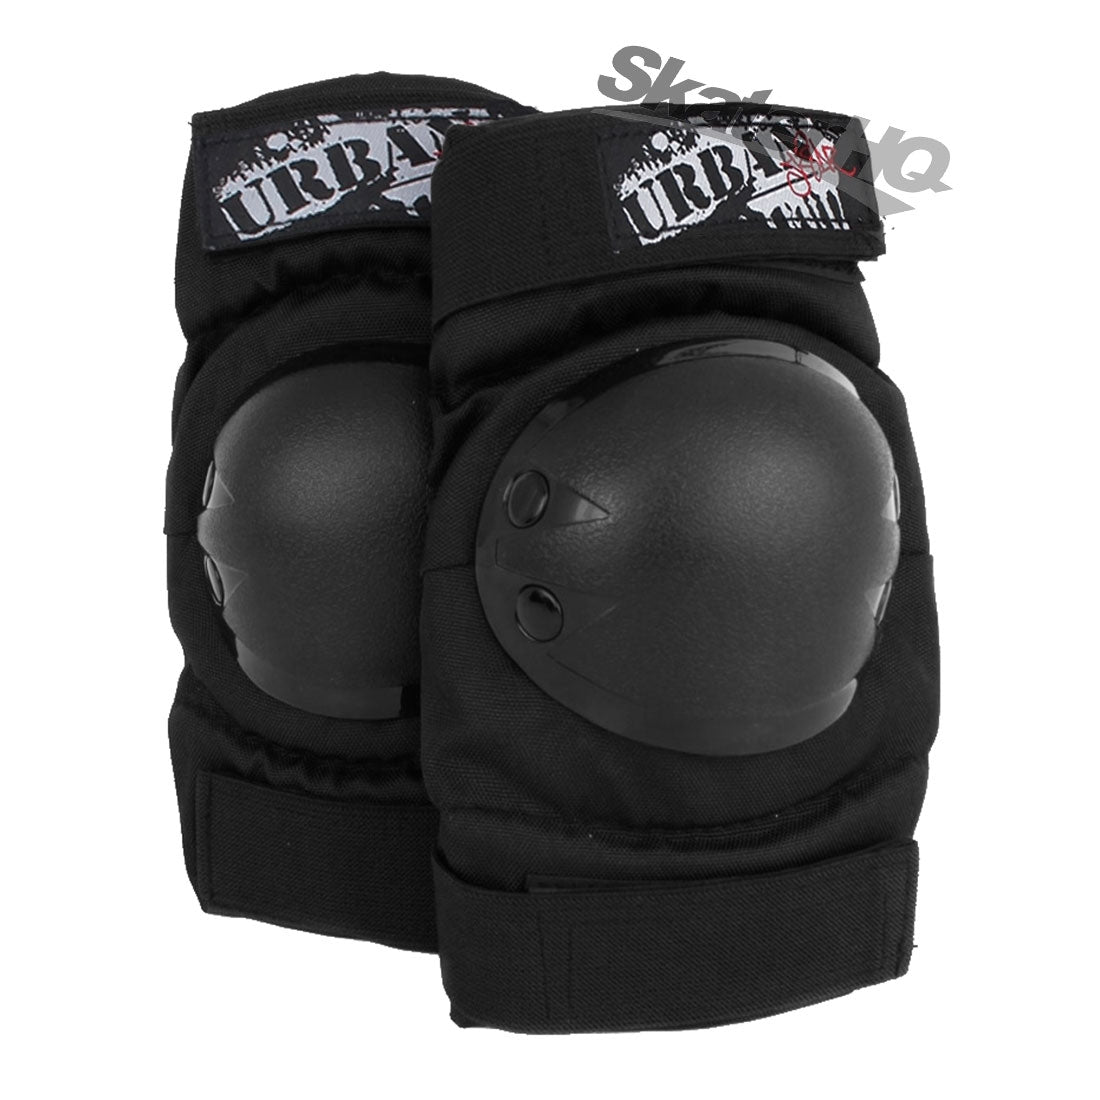 Urban Skater Elbow Pads - XLarge Protective Gear